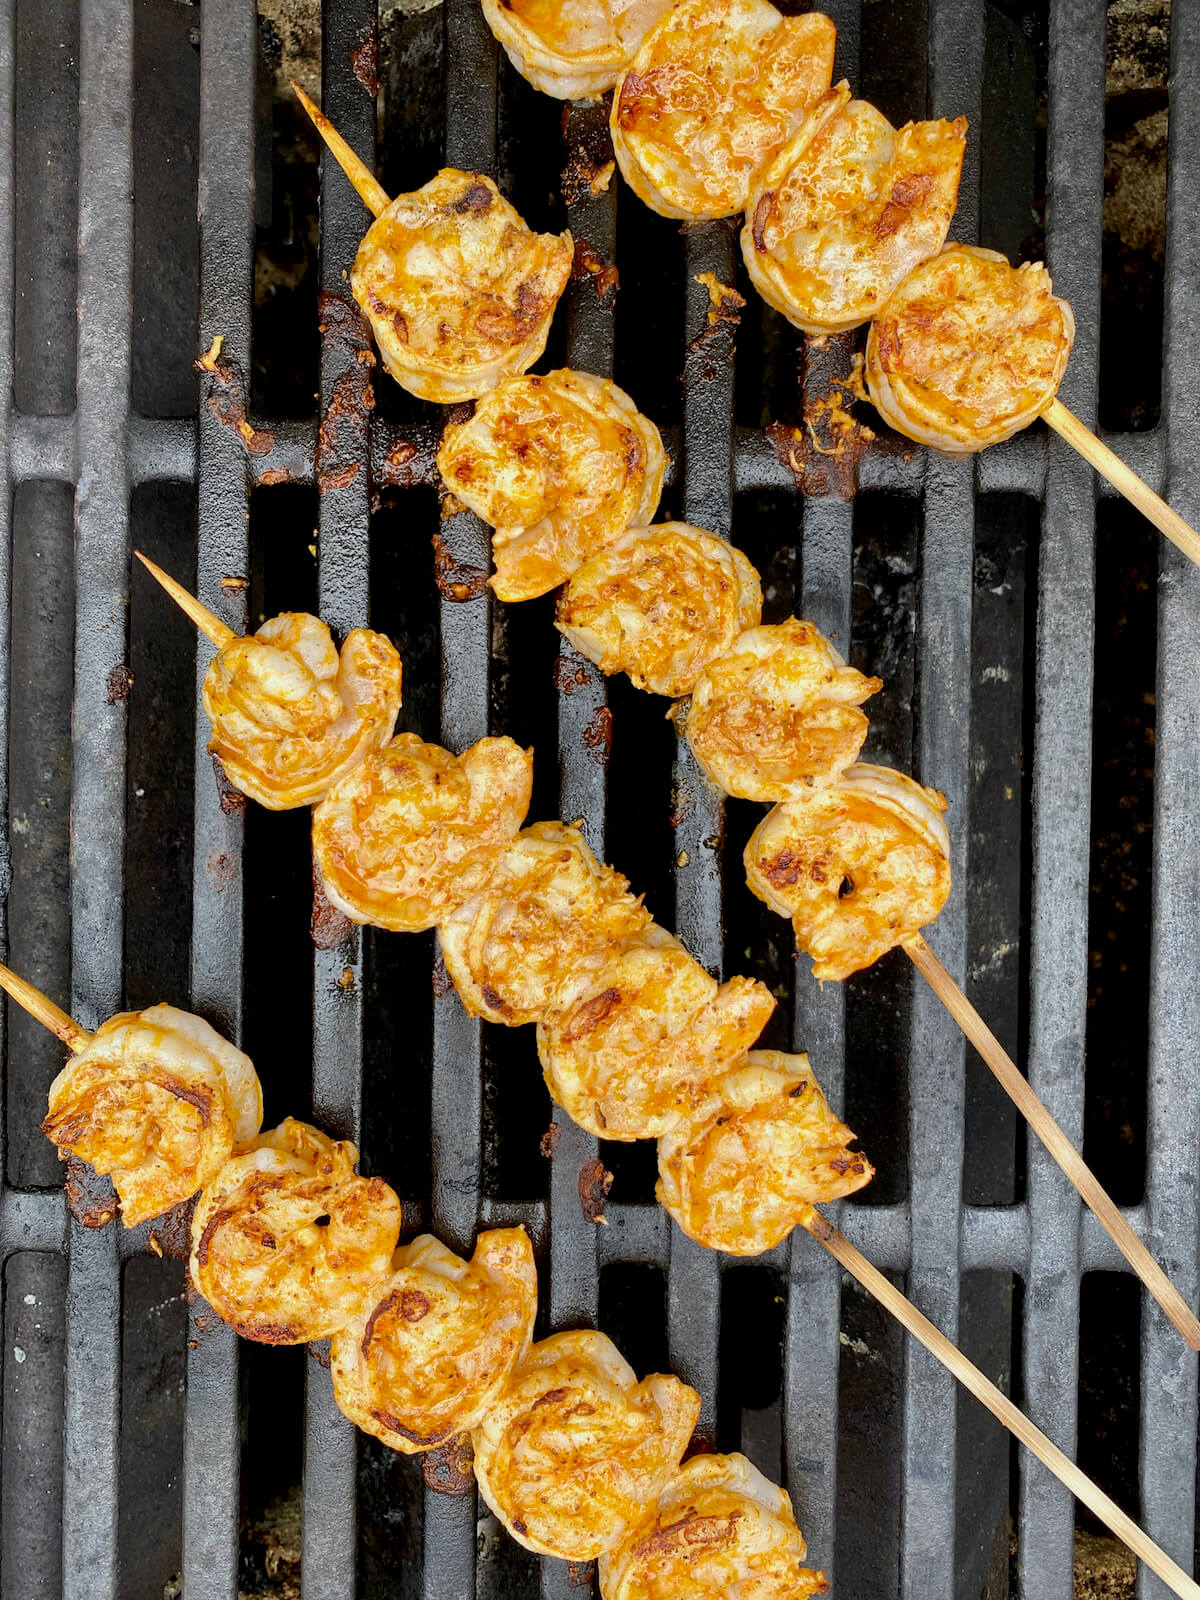 Four skewers of shrimp cooking on the grill.